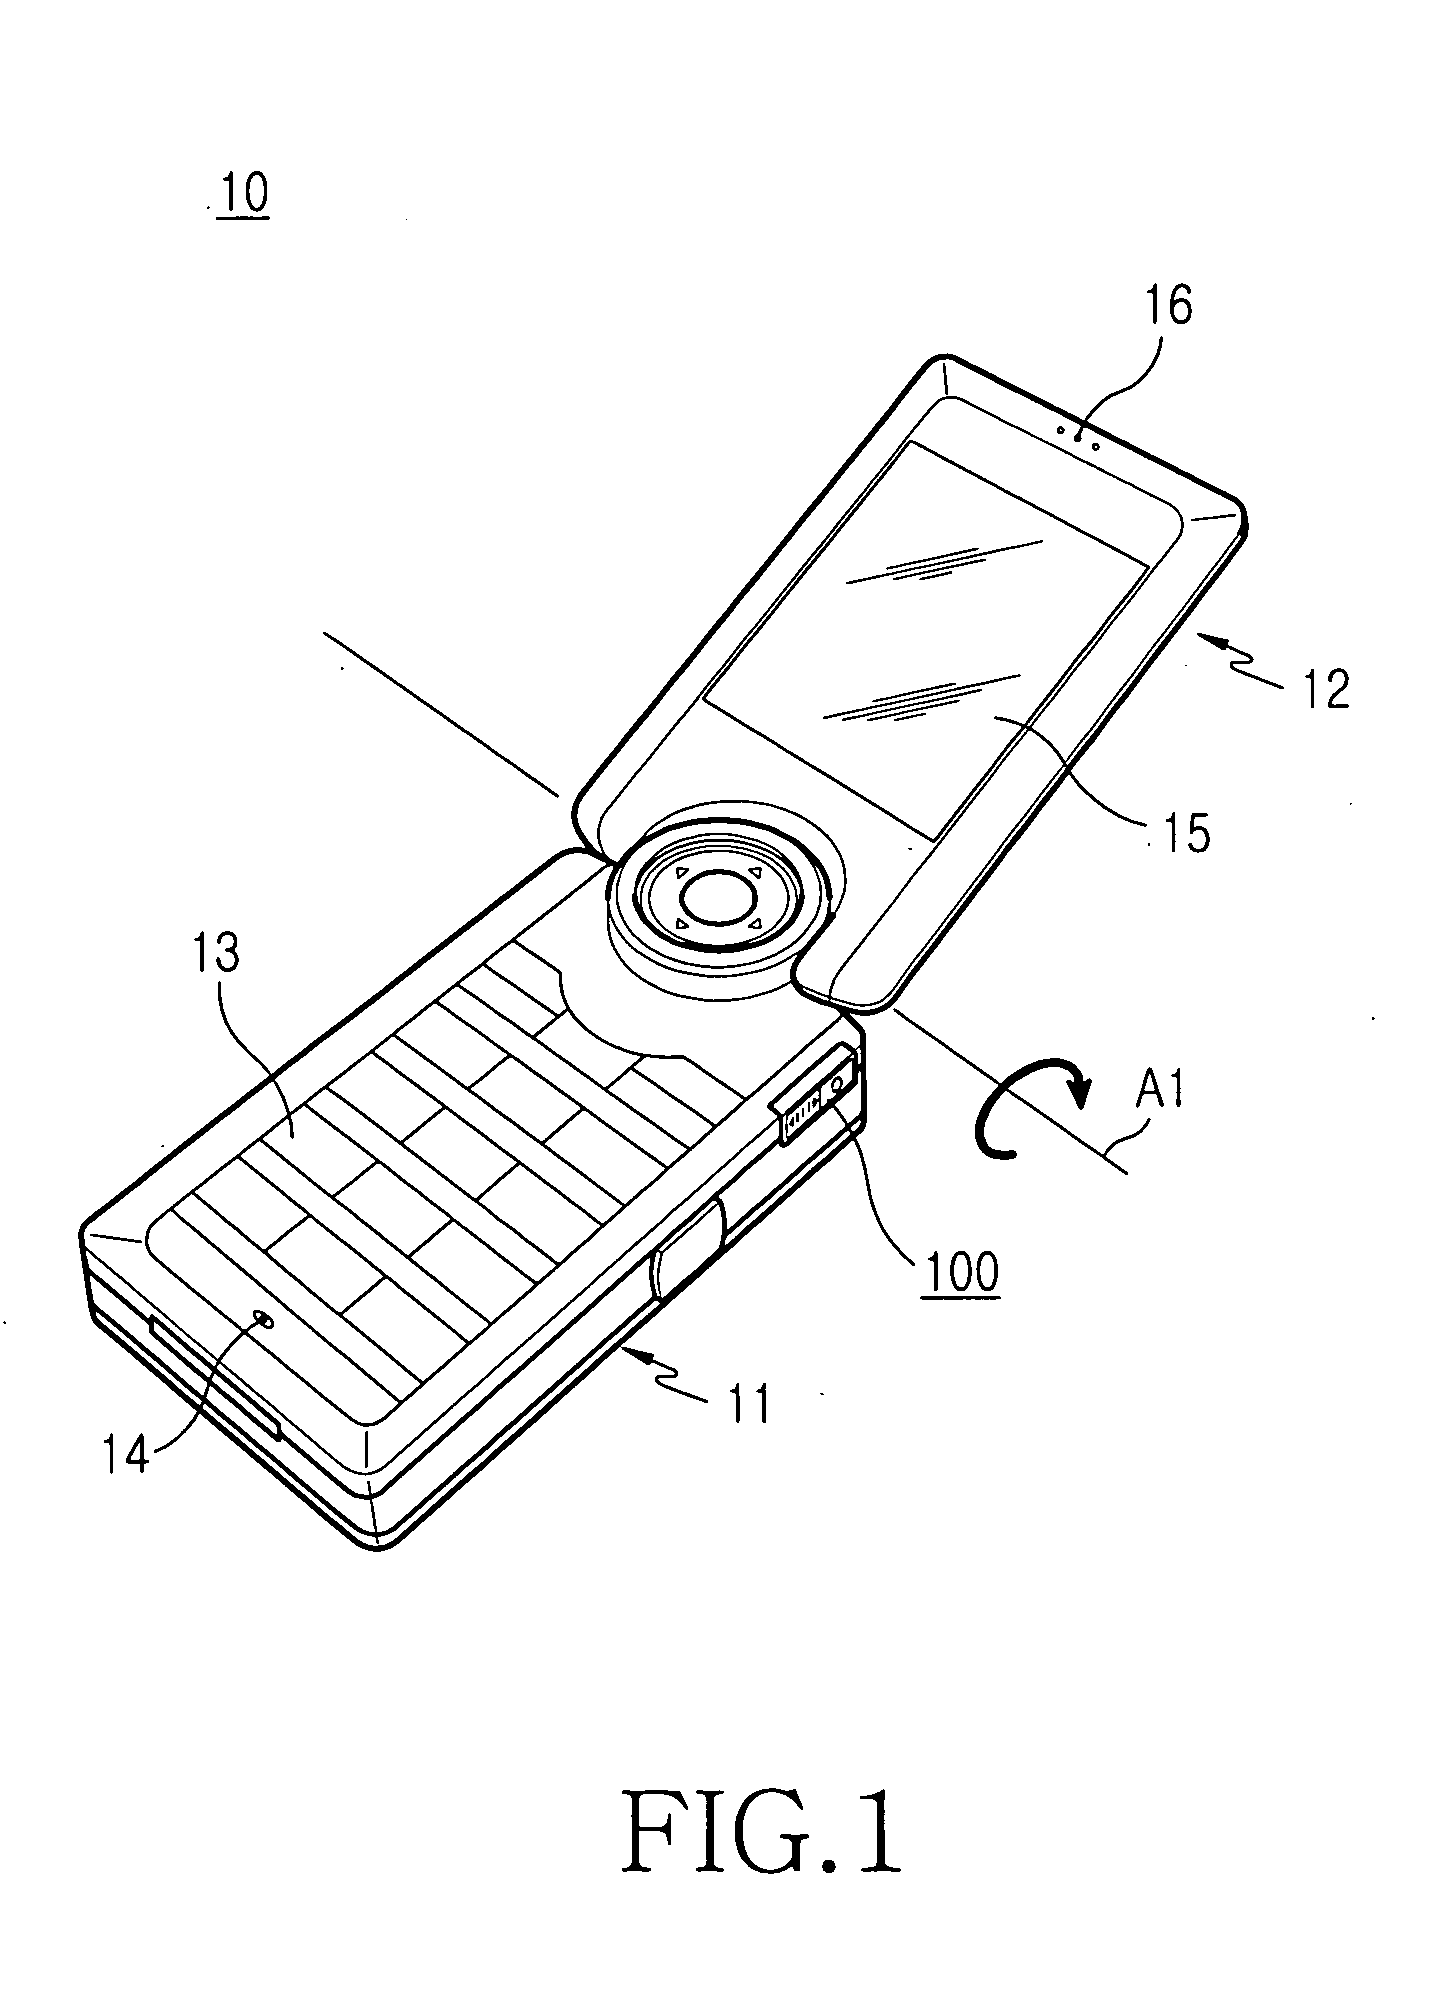 Port cover unit for electronic equipment